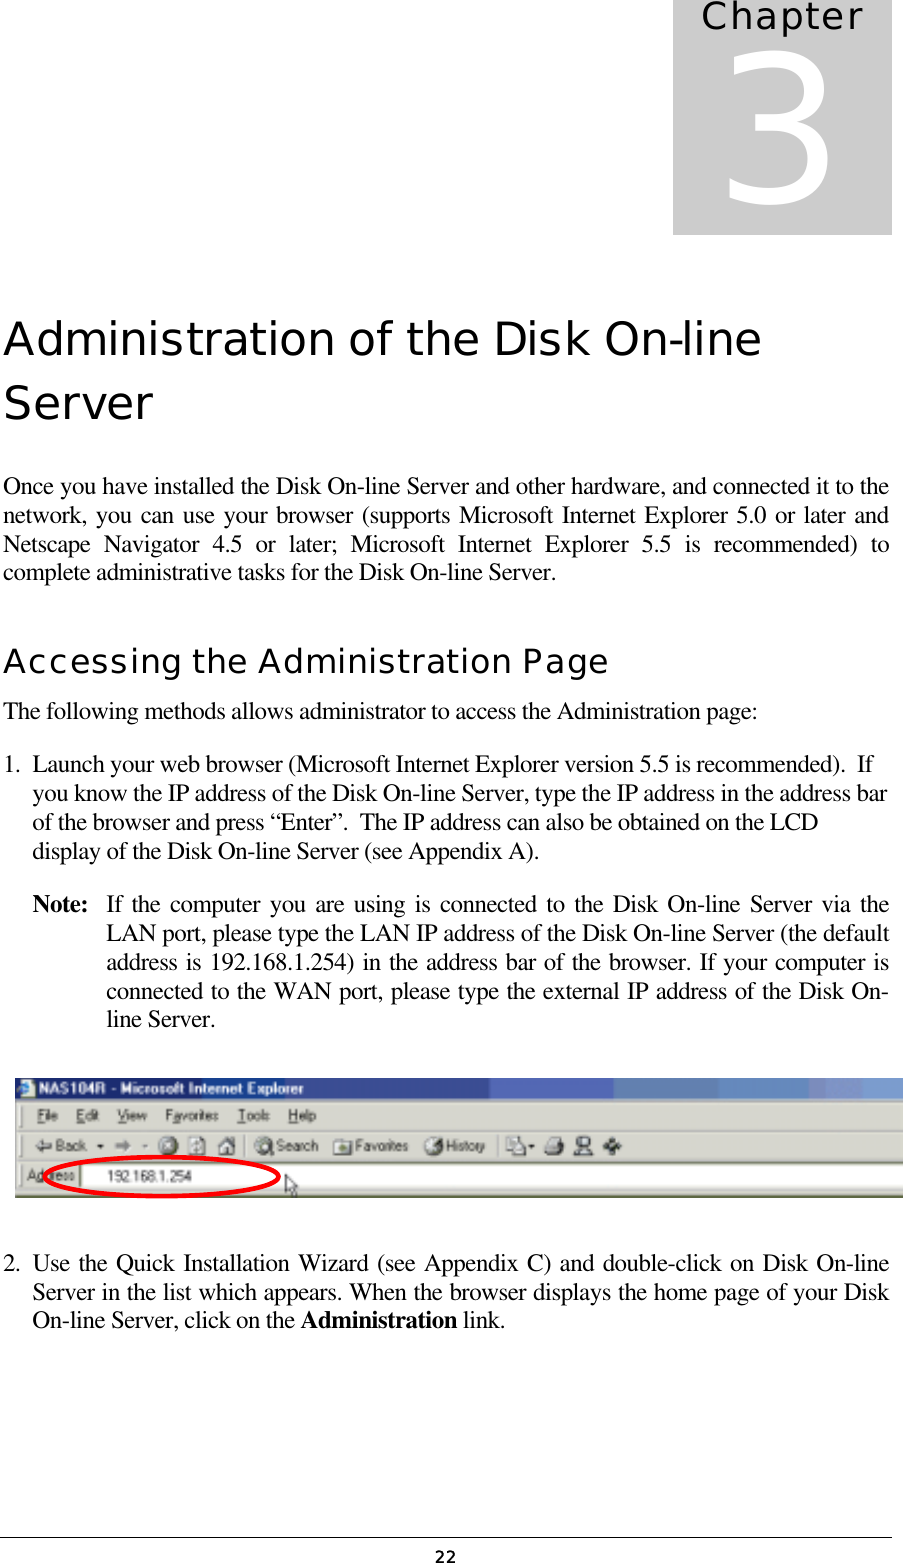   22Administration of the Disk On-line Server Once you have installed the Disk On-line Server and other hardware, and connected it to the network, you can use your browser (supports Microsoft Internet Explorer 5.0 or later and Netscape Navigator 4.5 or later; Microsoft Internet Explorer 5.5 is recommended) to complete administrative tasks for the Disk On-line Server. Accessing the Administration Page The following methods allows administrator to access the Administration page: 1.  Launch your web browser (Microsoft Internet Explorer version 5.5 is recommended).  If you know the IP address of the Disk On-line Server, type the IP address in the address bar of the browser and press “Enter”.  The IP address can also be obtained on the LCD display of the Disk On-line Server (see Appendix A). Note:   If the computer you are using is connected to the Disk On-line Server via the LAN port, please type the LAN IP address of the Disk On-line Server (the default address is 192.168.1.254) in the address bar of the browser. If your computer is connected to the WAN port, please type the external IP address of the Disk On-line Server.     2. Use the Quick Installation Wizard (see Appendix C) and double-click on Disk On-line Server in the list which appears. When the browser displays the home page of your Disk On-line Server, click on the Administration link. Chapter 3